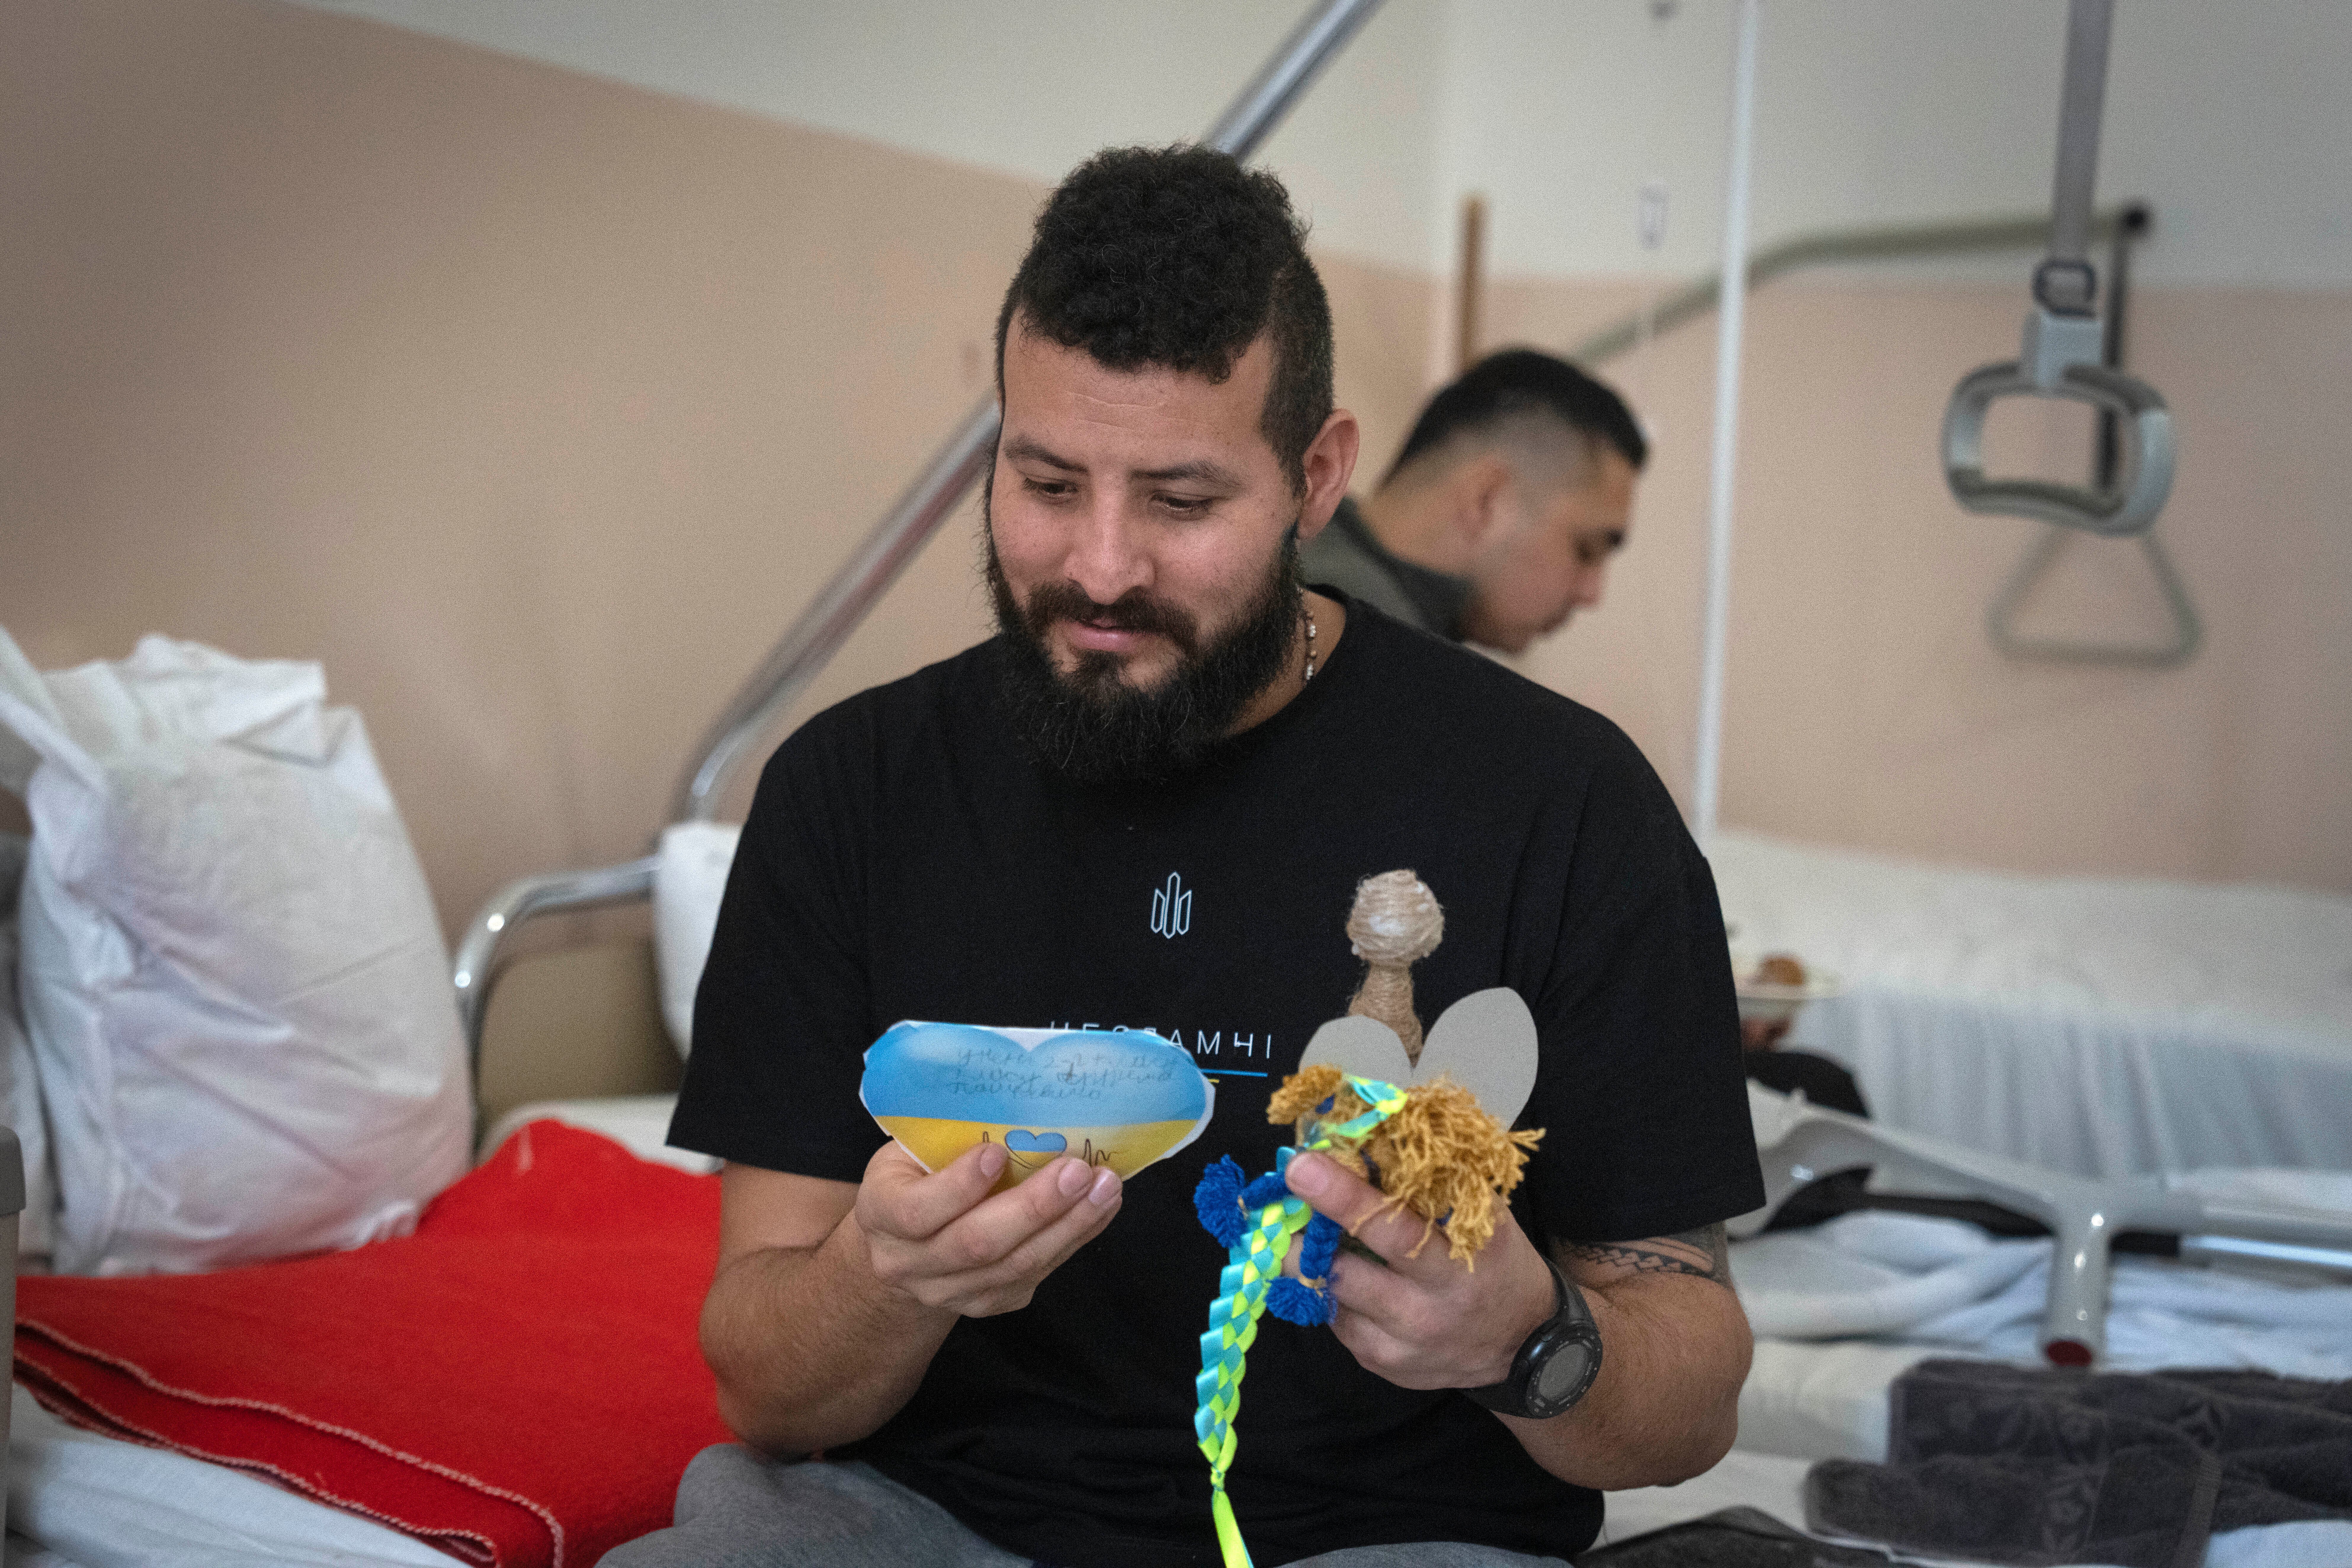 Russia Ukraine A wounded professional soldier from Medellín, Colombia who goes by the call sign of Checho, 32, smiles as he holds gifts